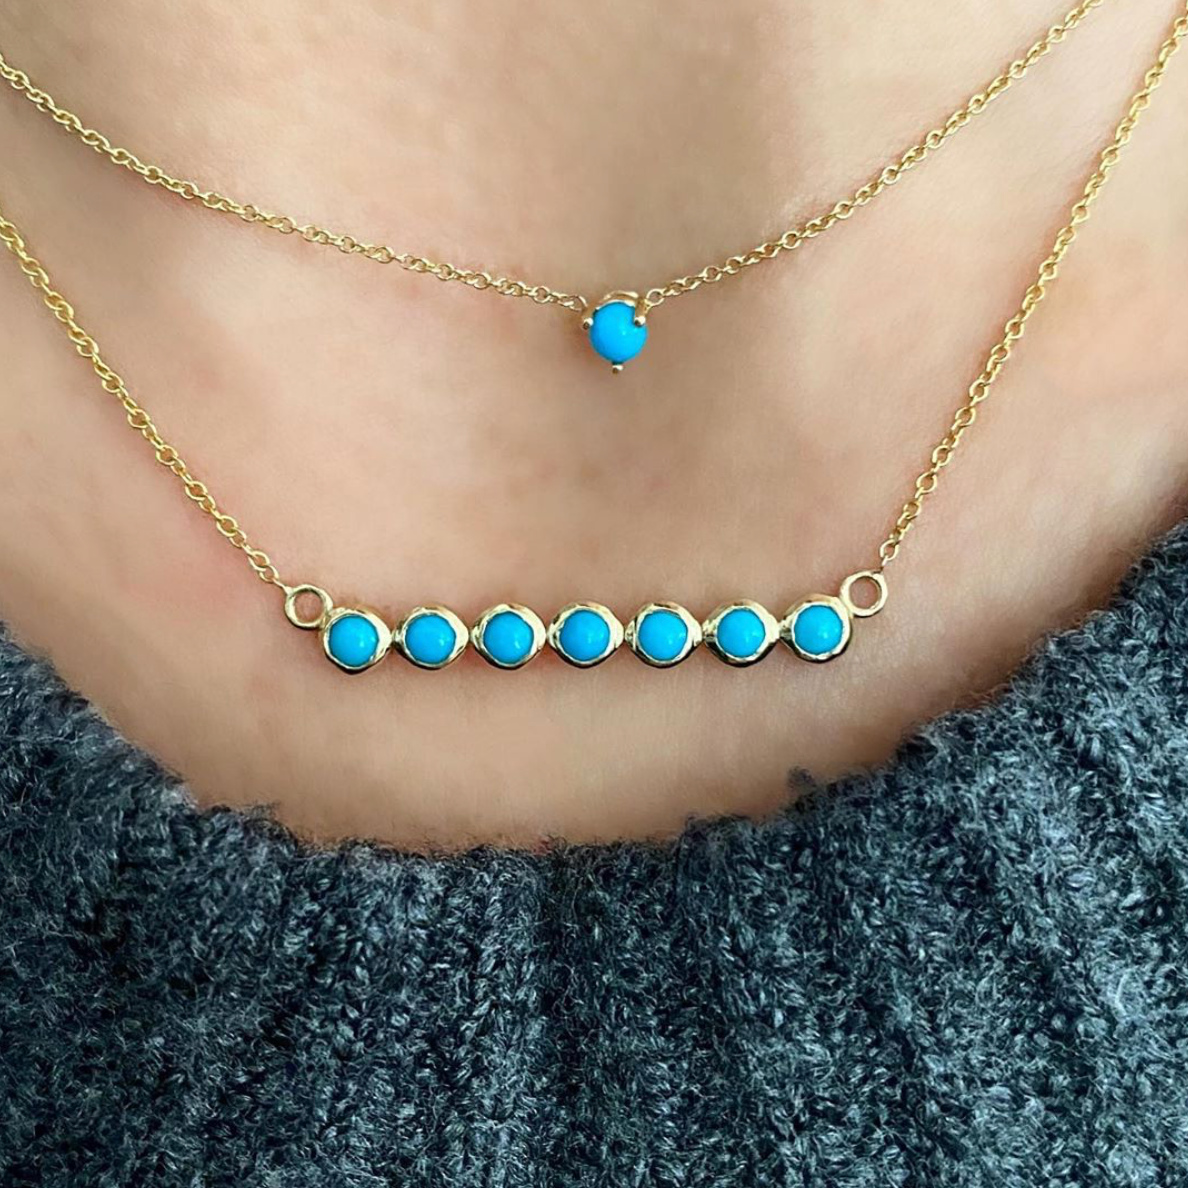 7-turquoise-stone-bar-necklace-yellow-gold-shylee-rose-jewelry